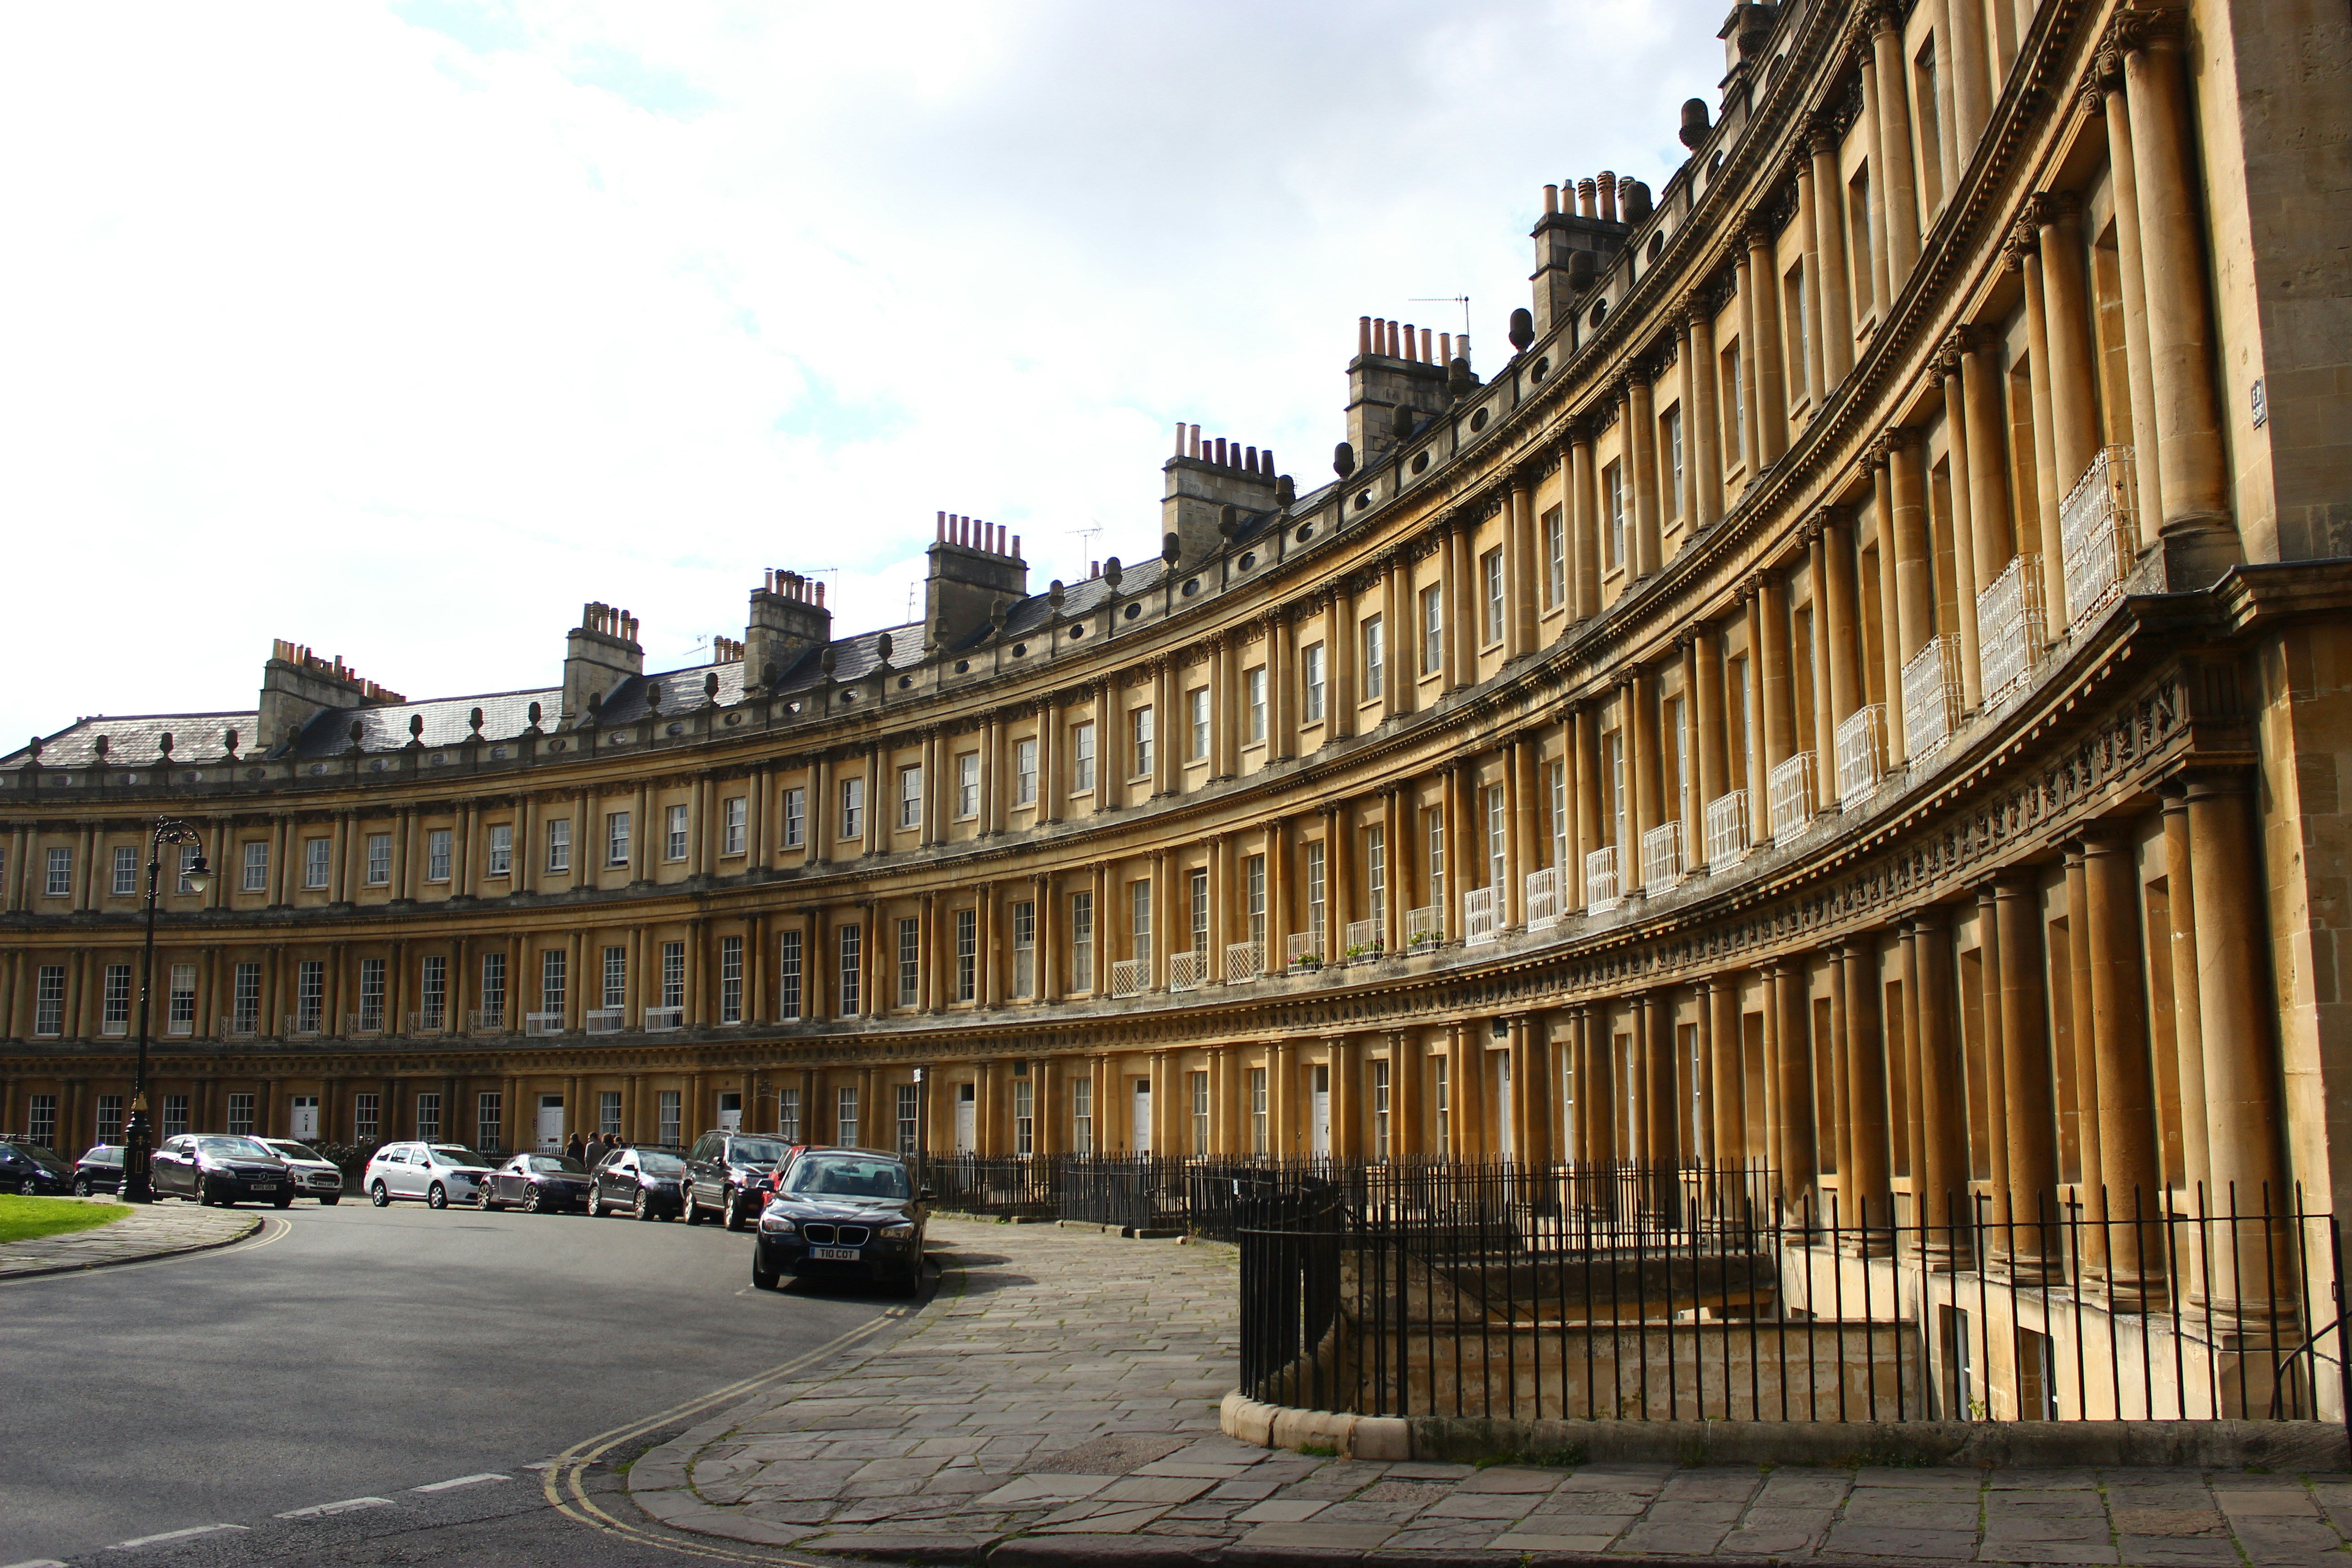 A row of buildings in Bath, Somerset, England